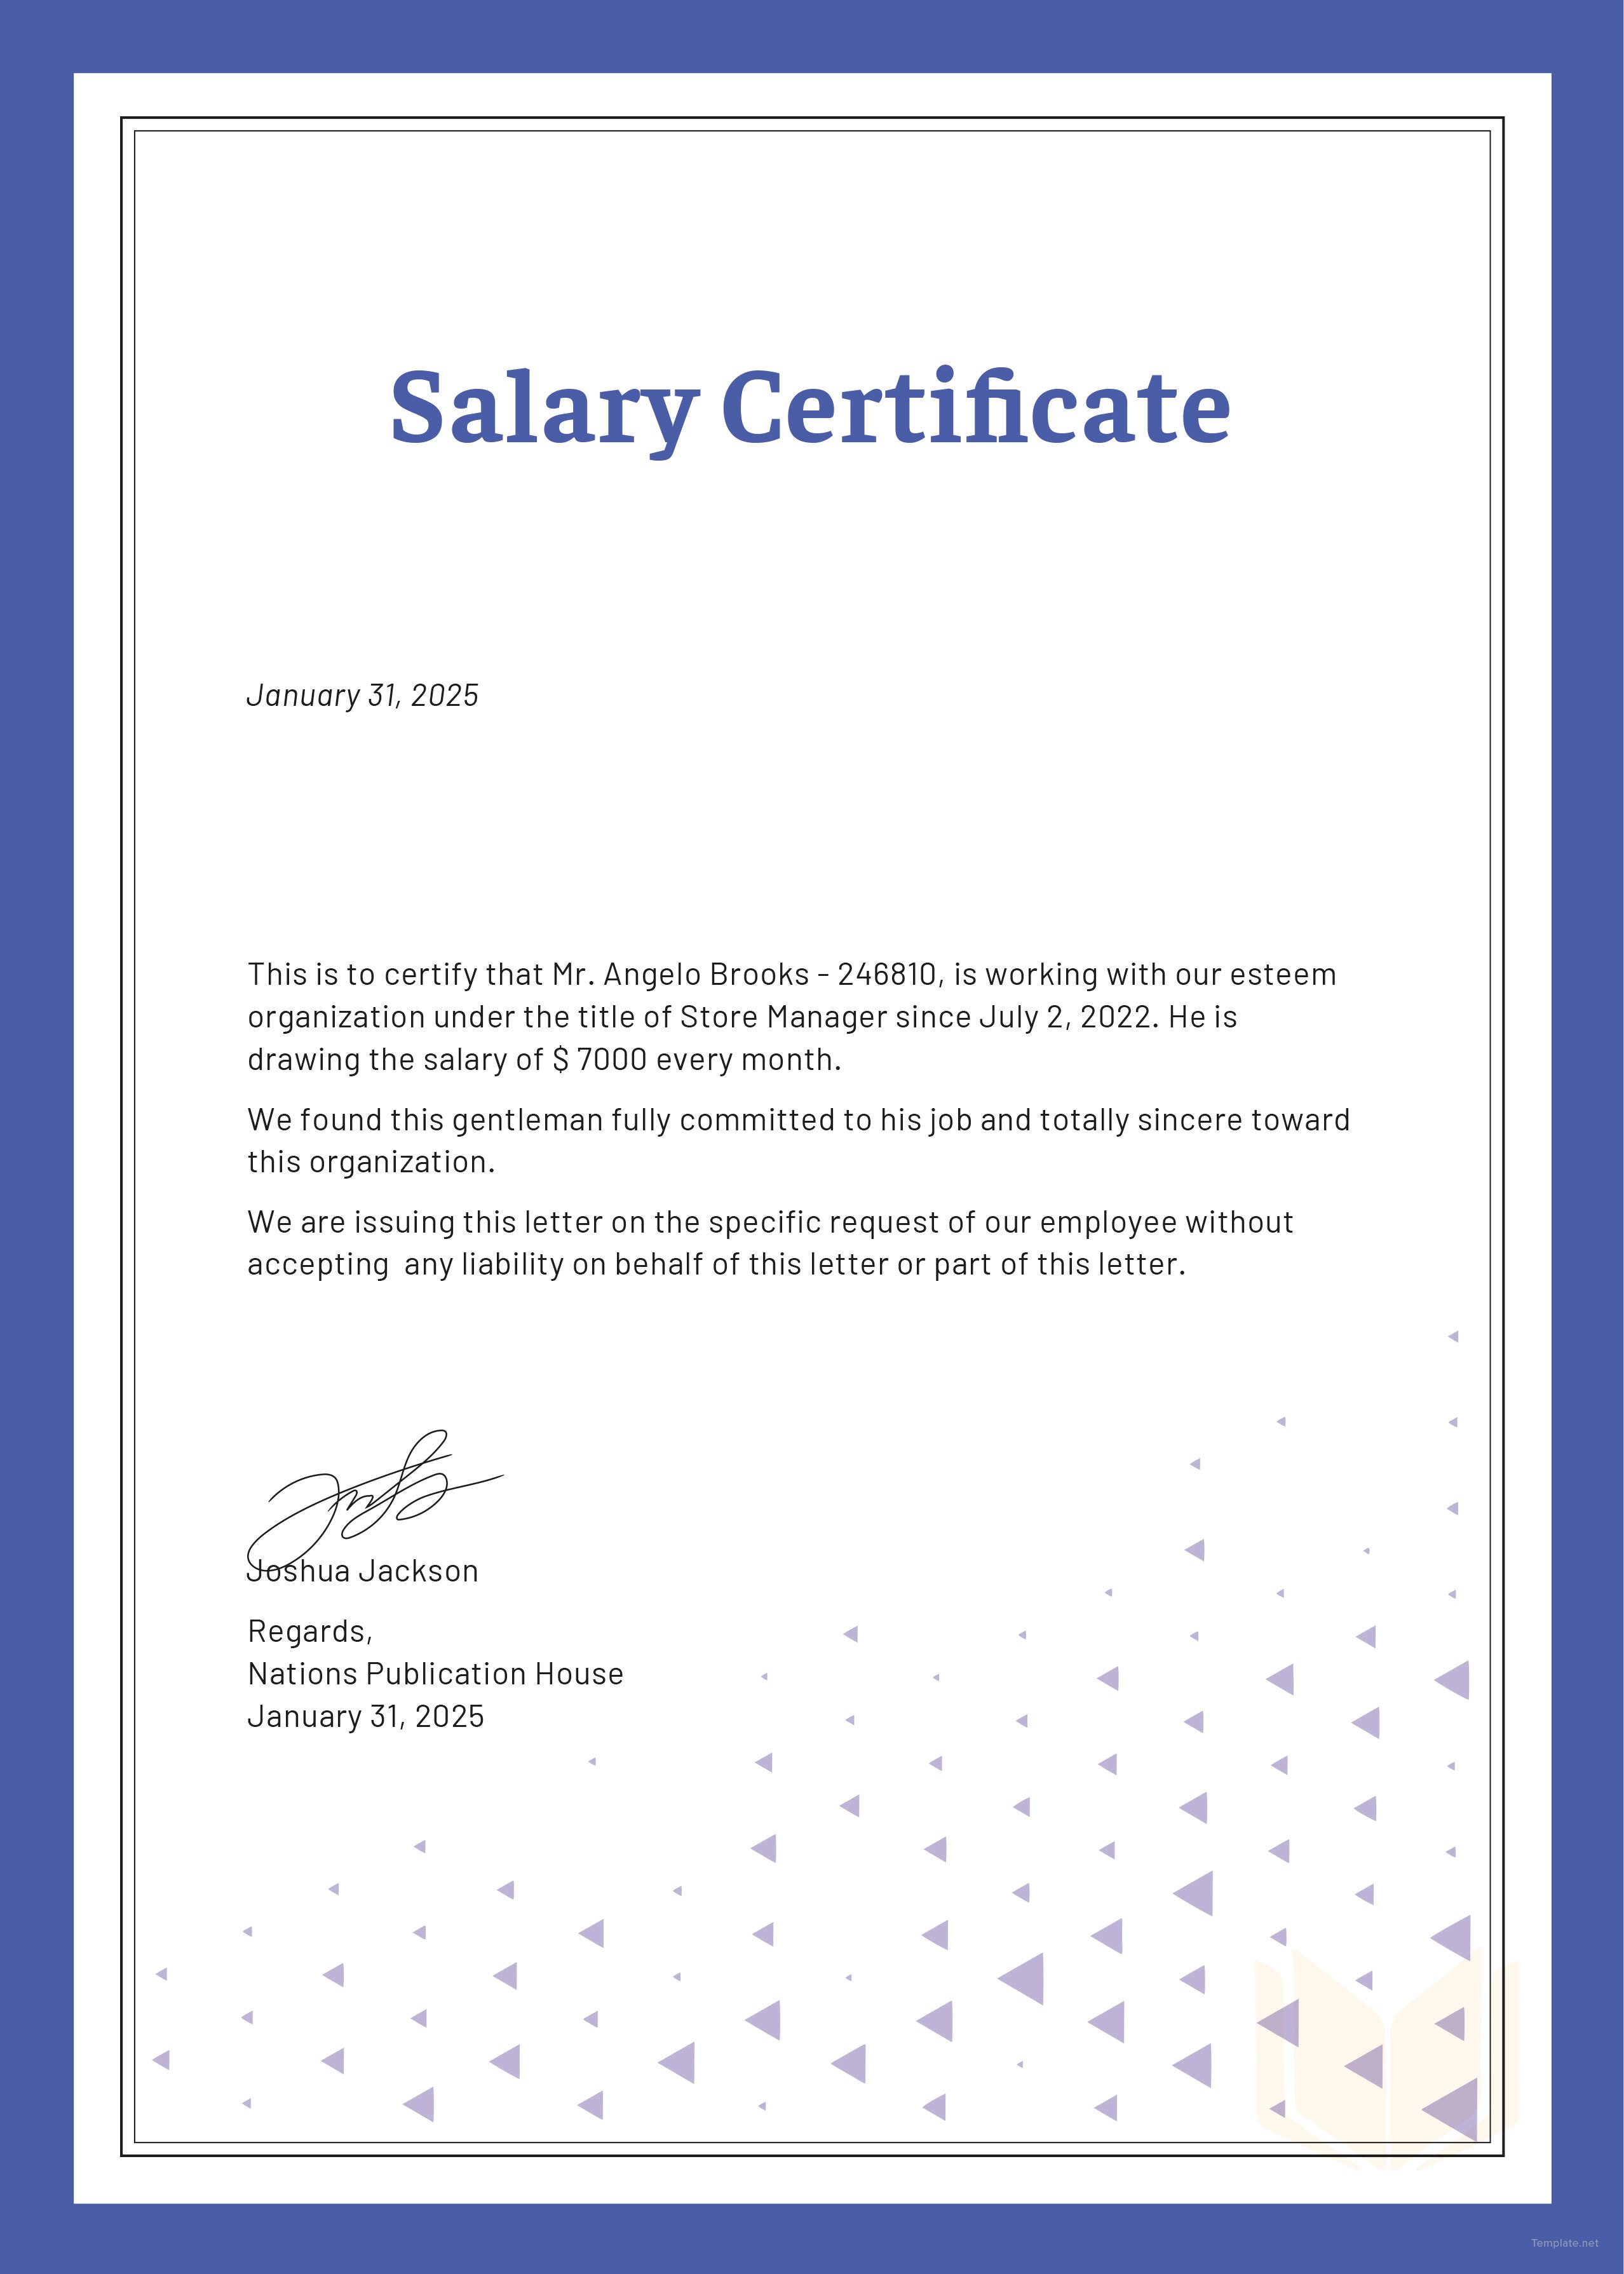 free-salary-certificate-template-in-microsoft-word-microsoft-publisher